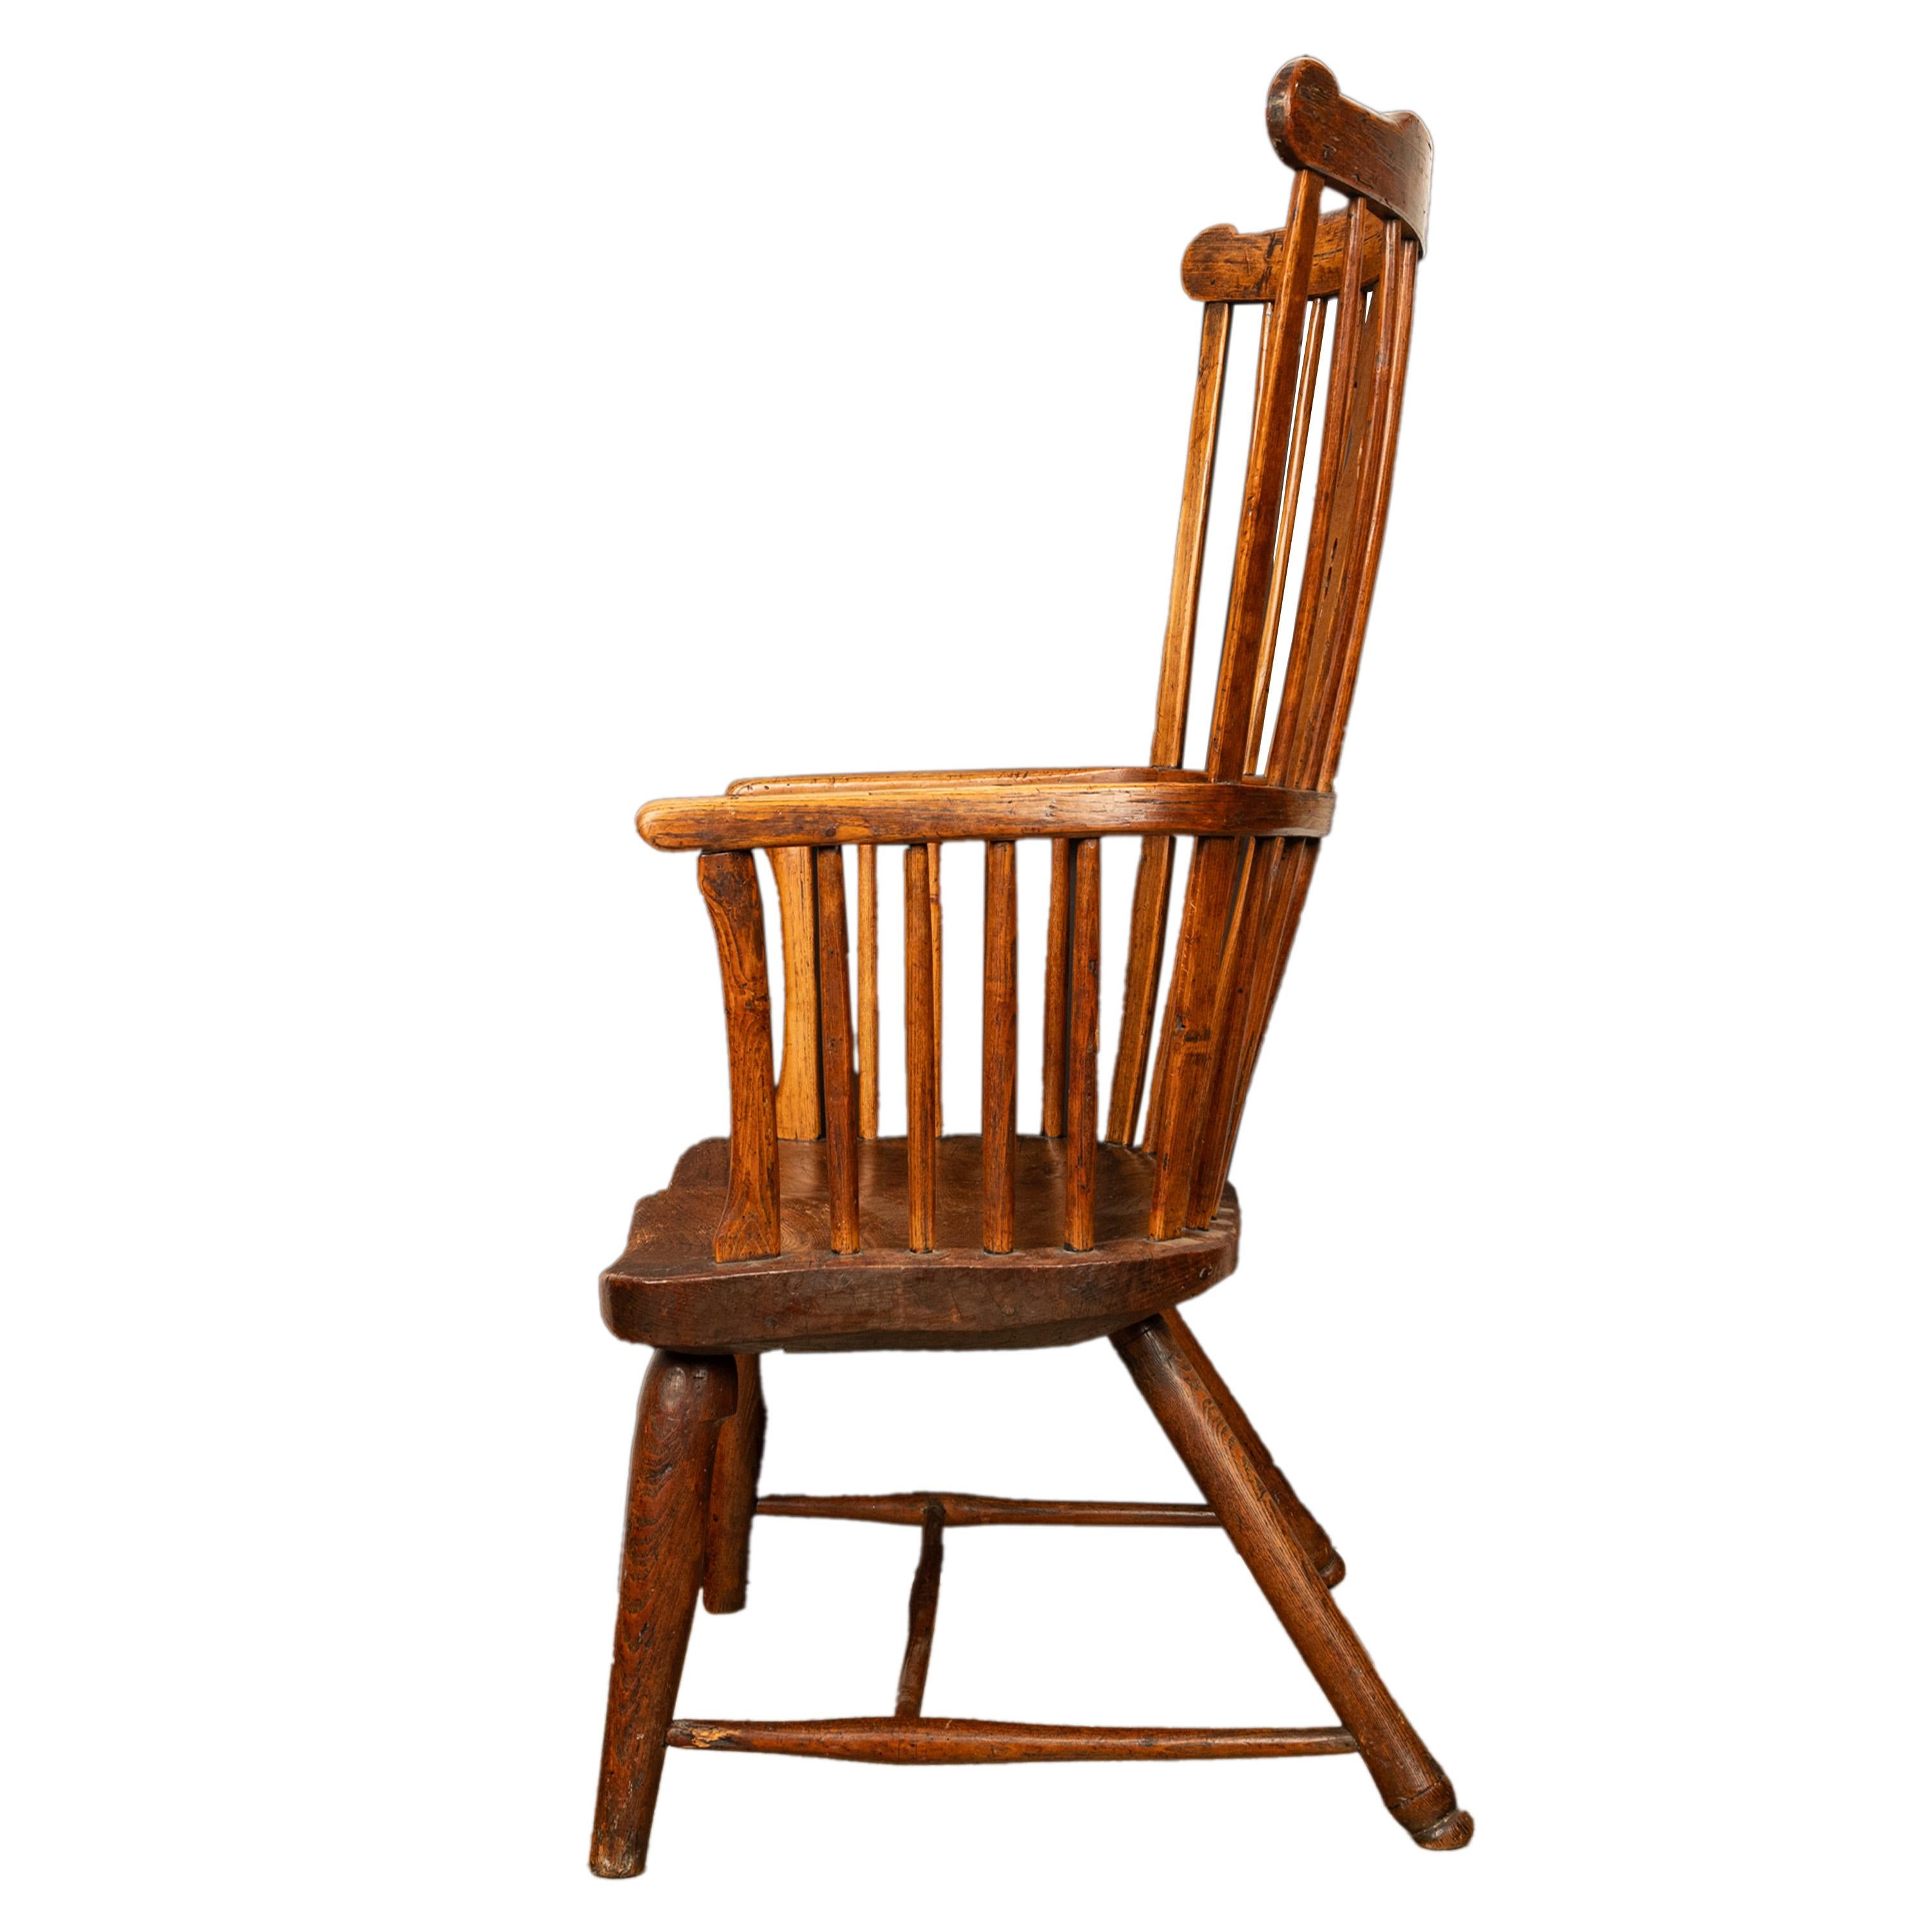 Late 18th Century Important Antique Earliest Recorded English Windsor Chair by Kerry Evesham 1793 For Sale